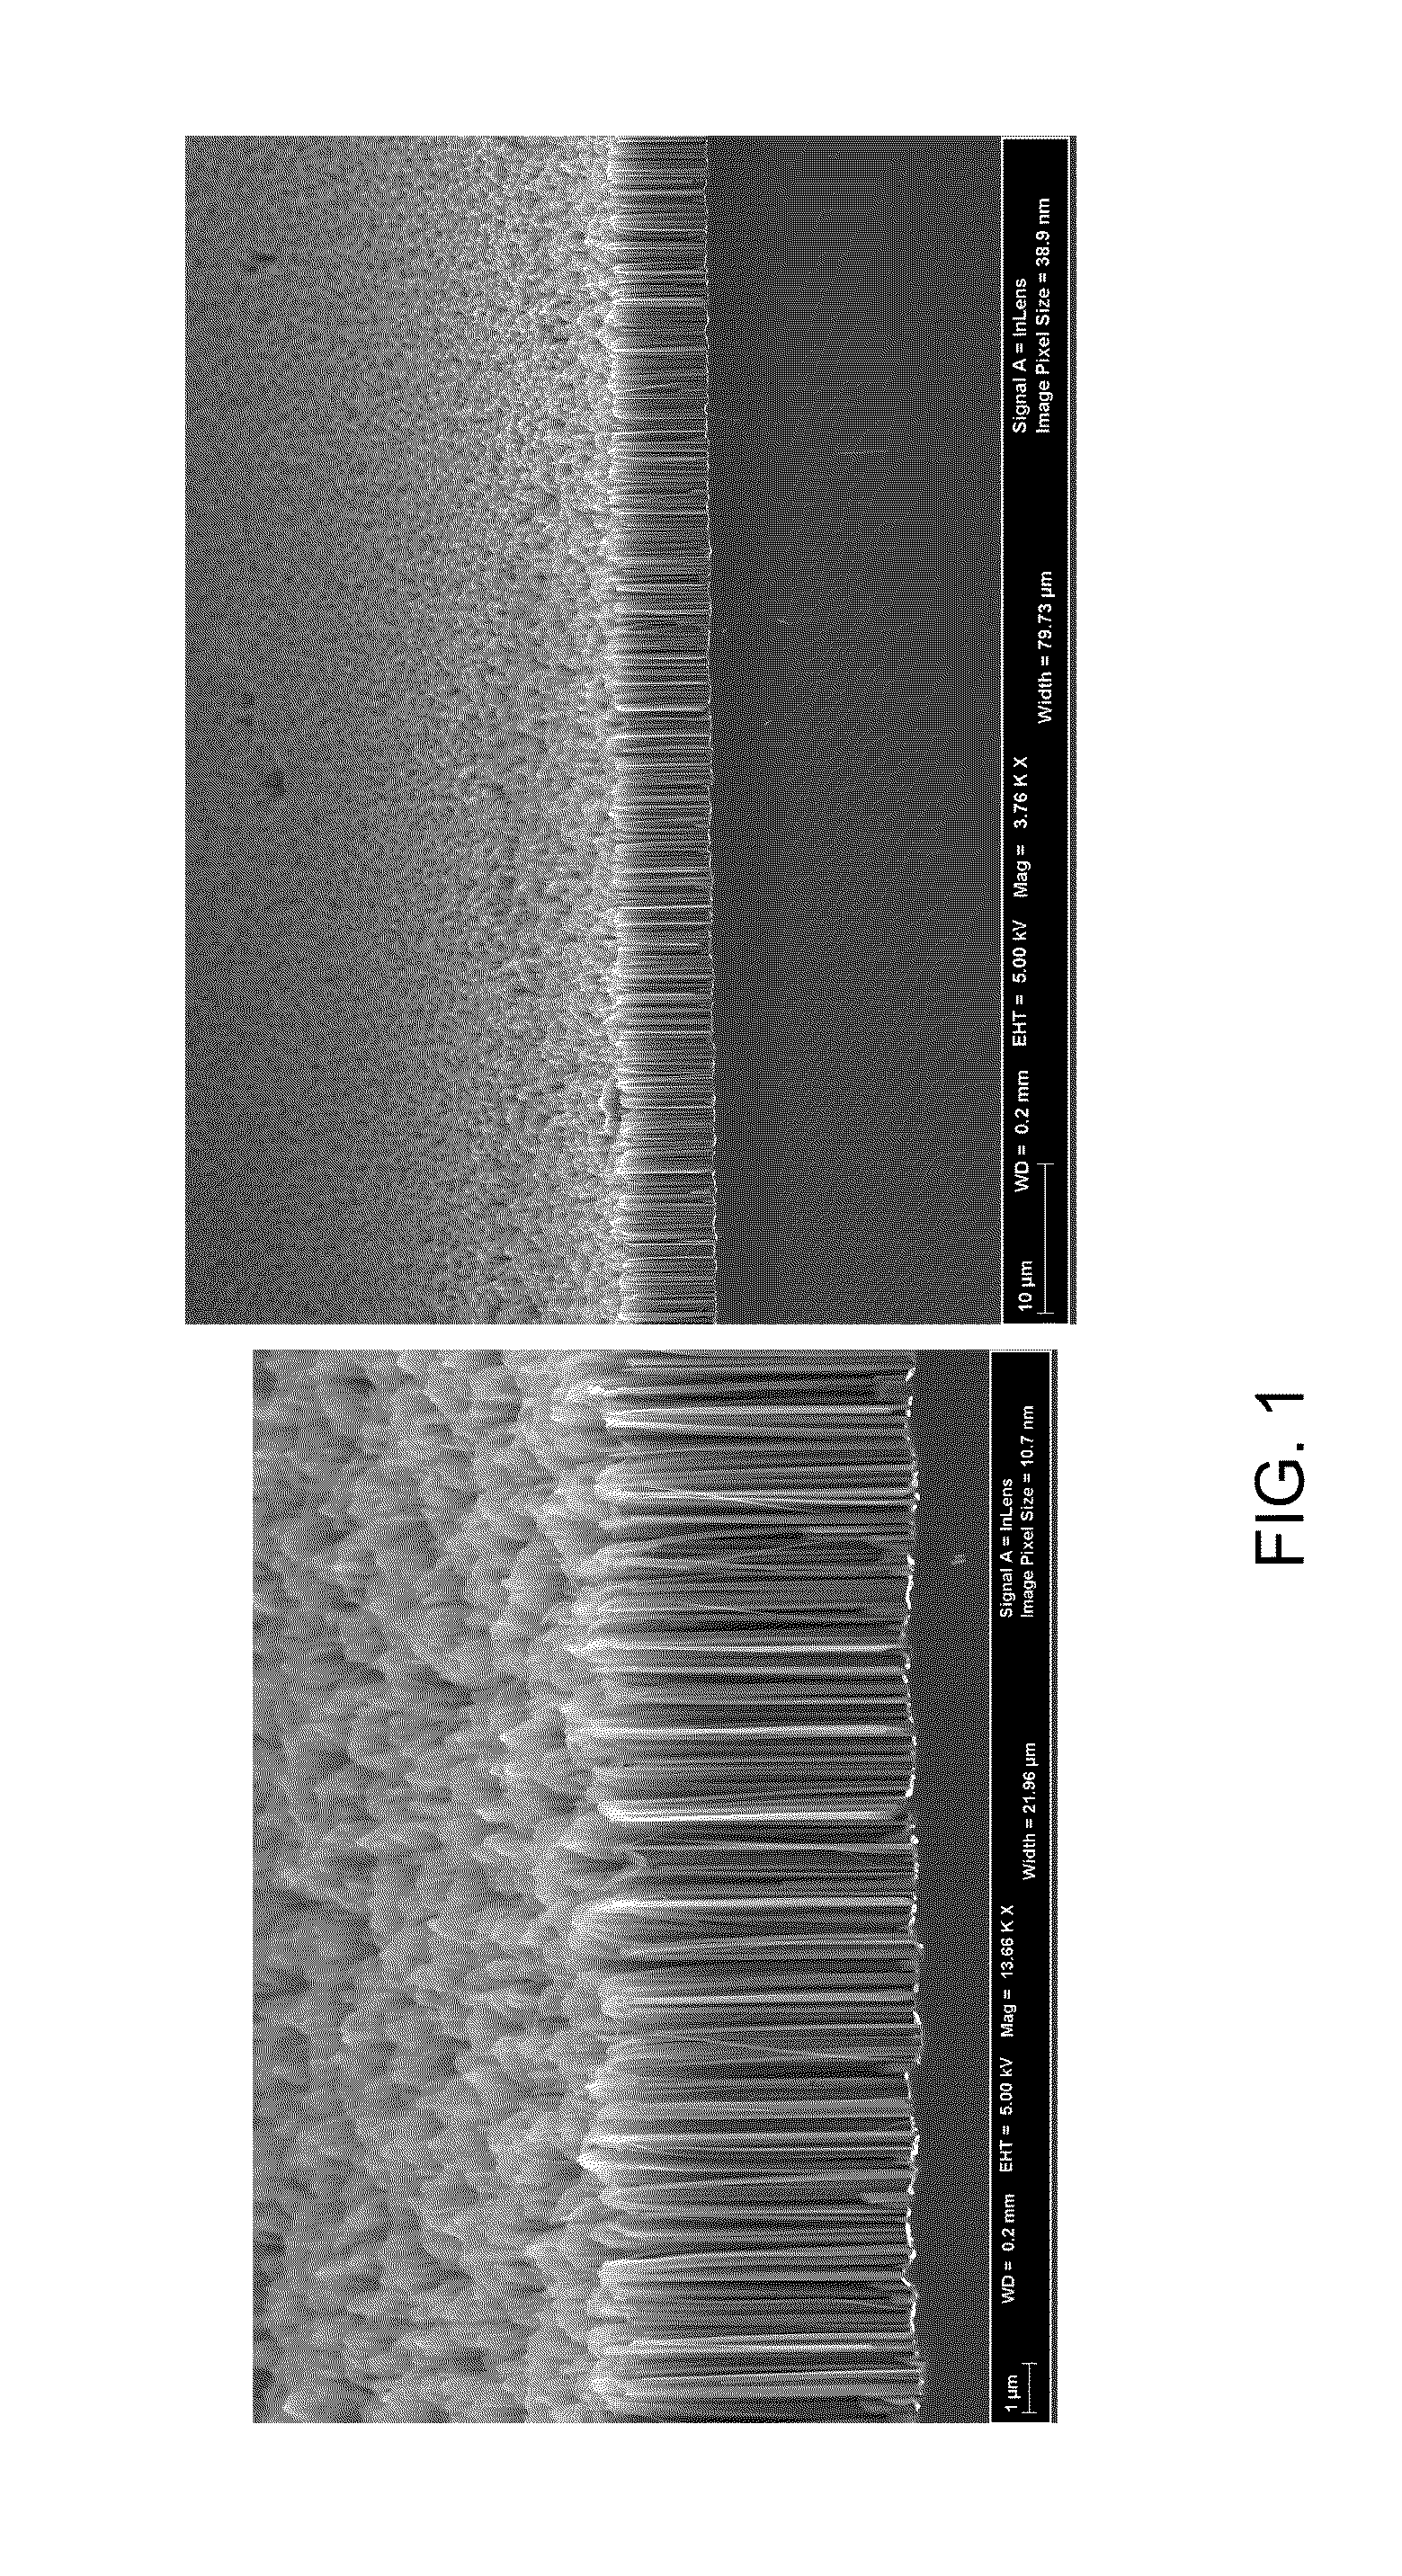 Process for Fabricating Nanowire Arrays